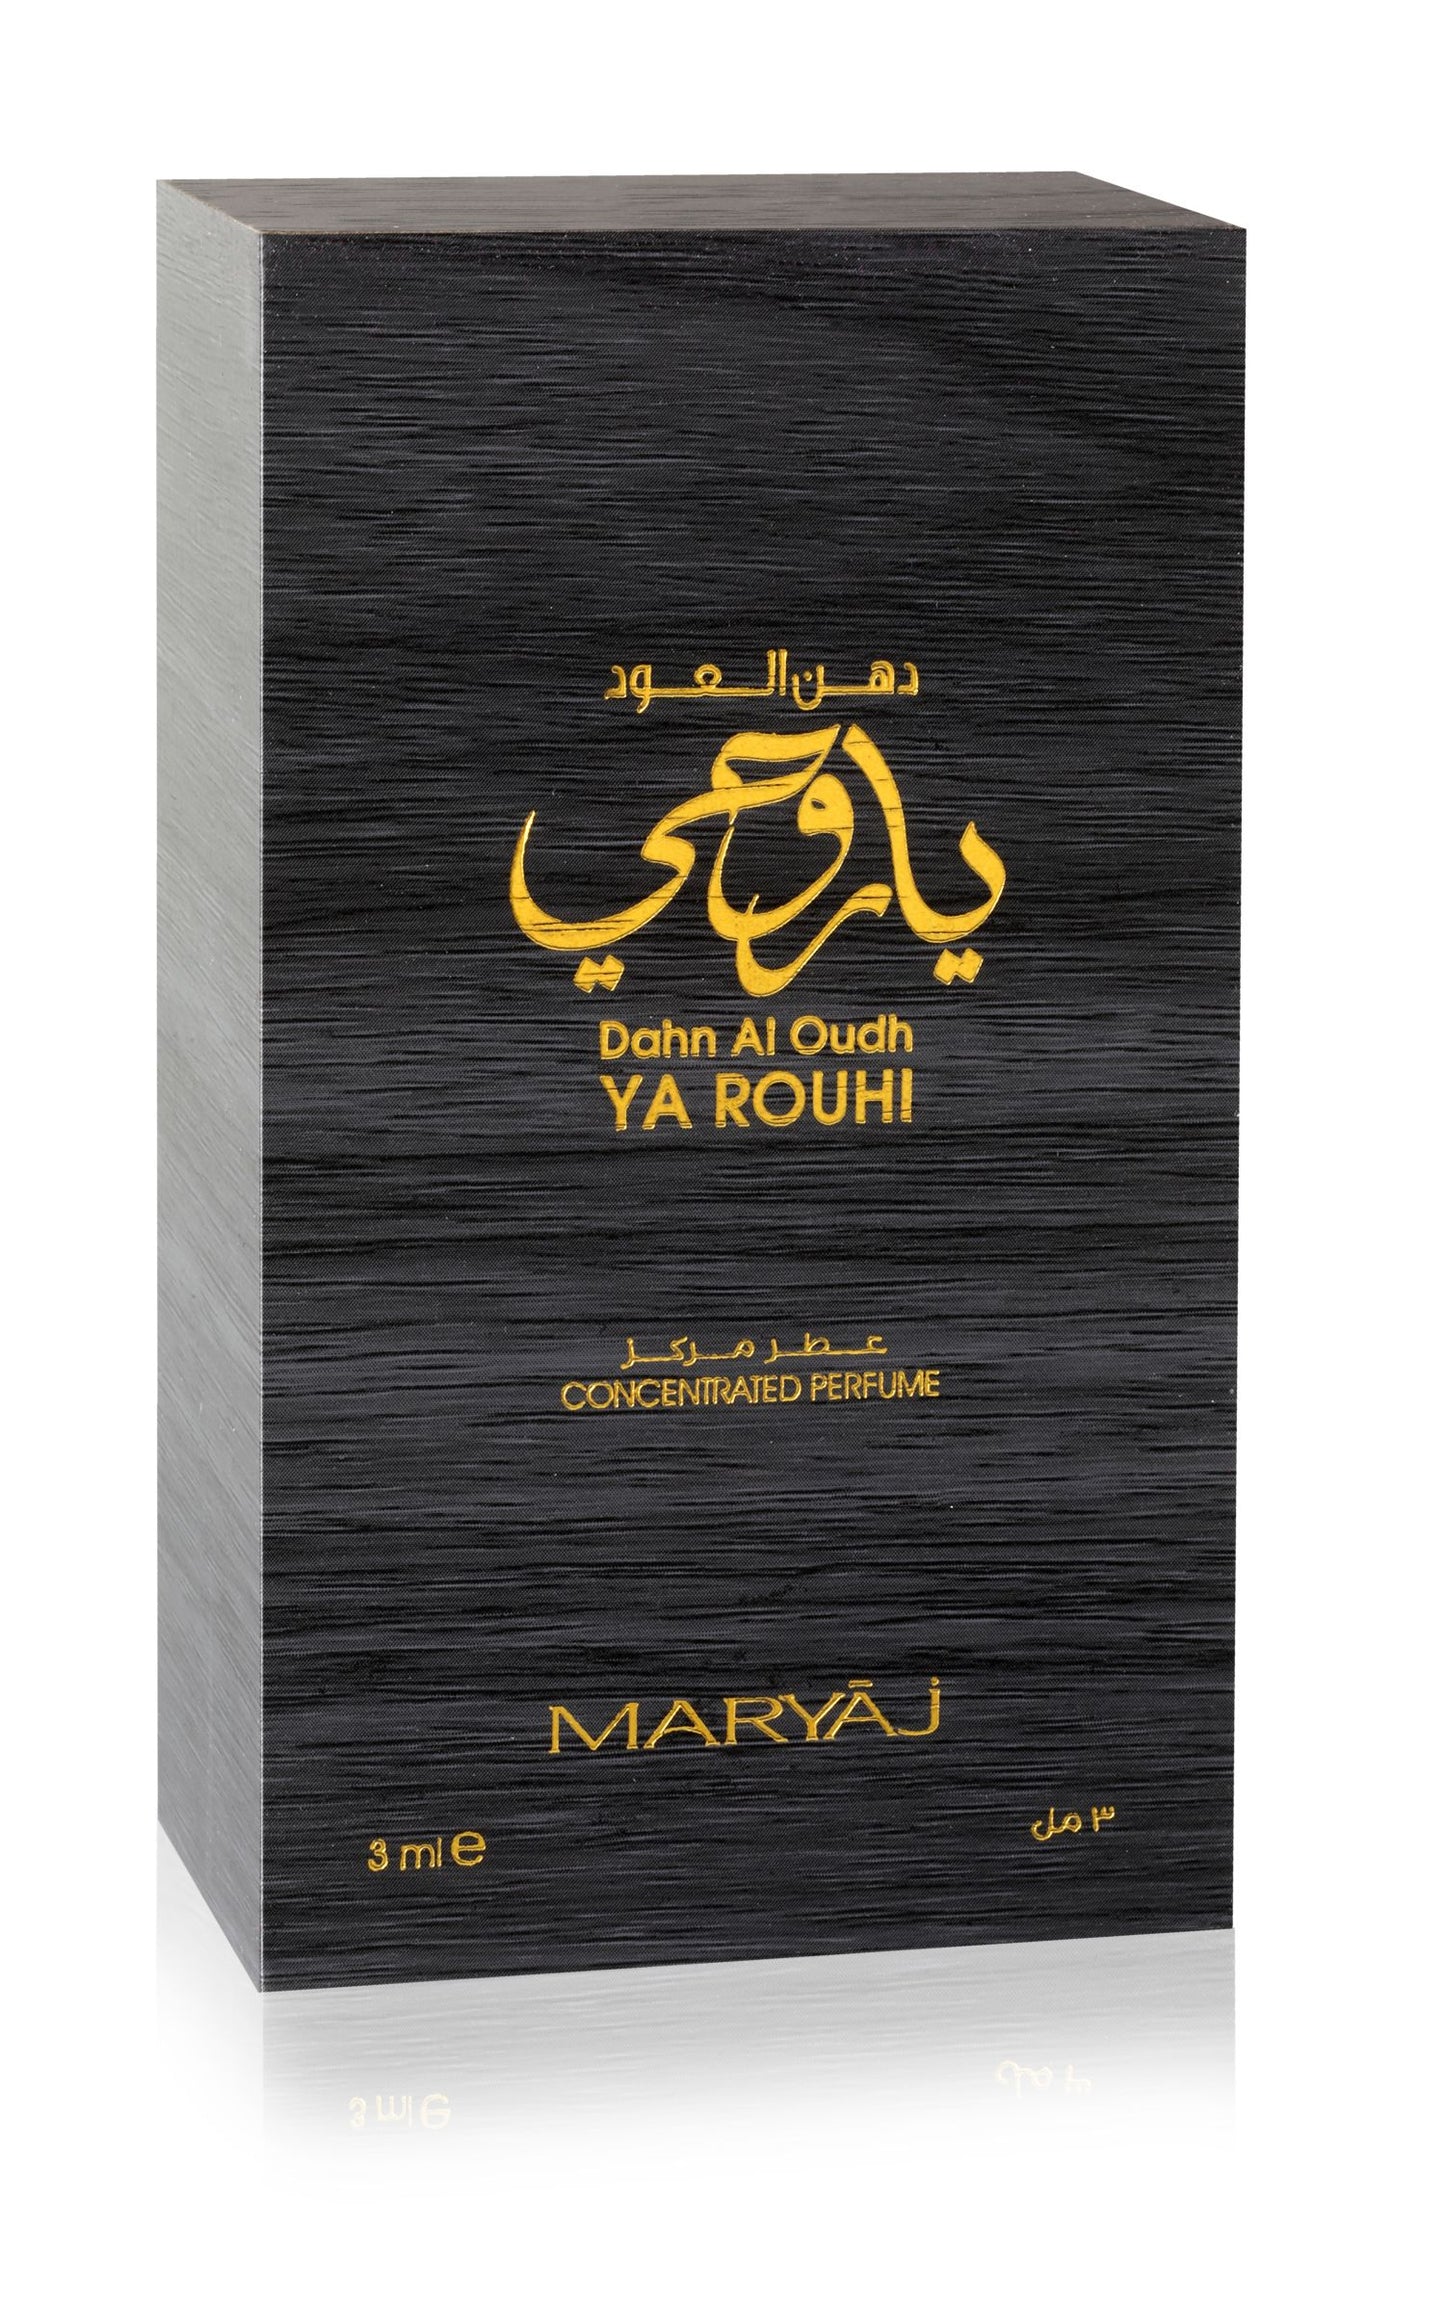 SHAY OUD EDP with DHAN AL OUD Combo for Unisex, Pack of 2